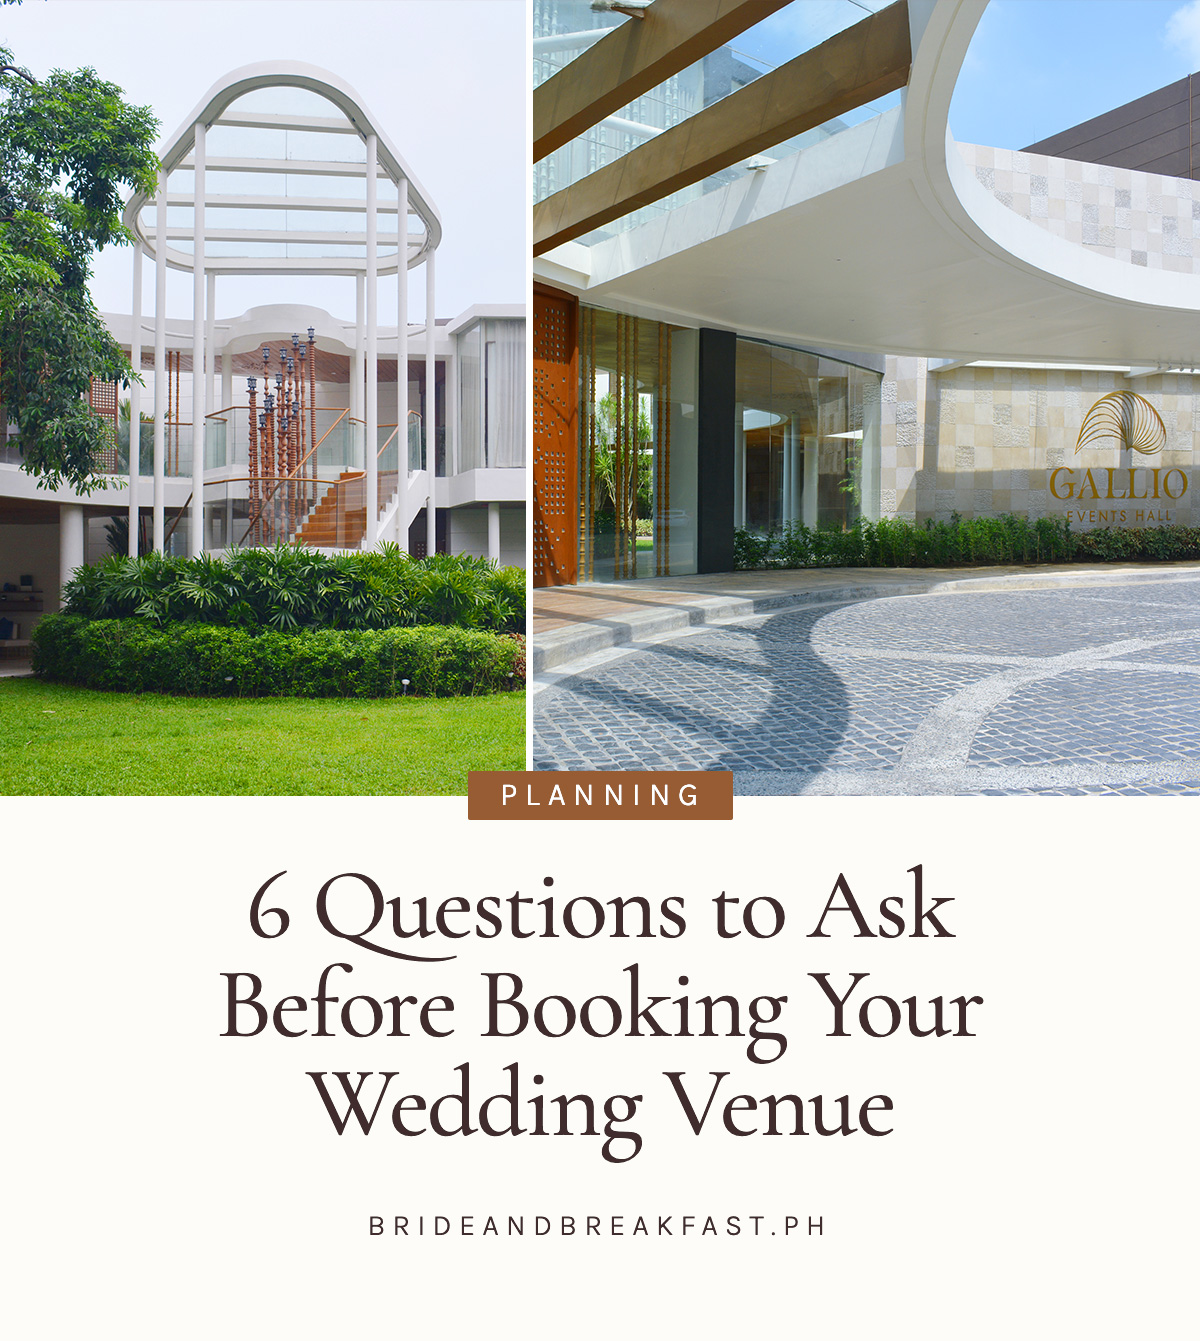 6 Questions to Ask Before Booking Your Wedding Venue